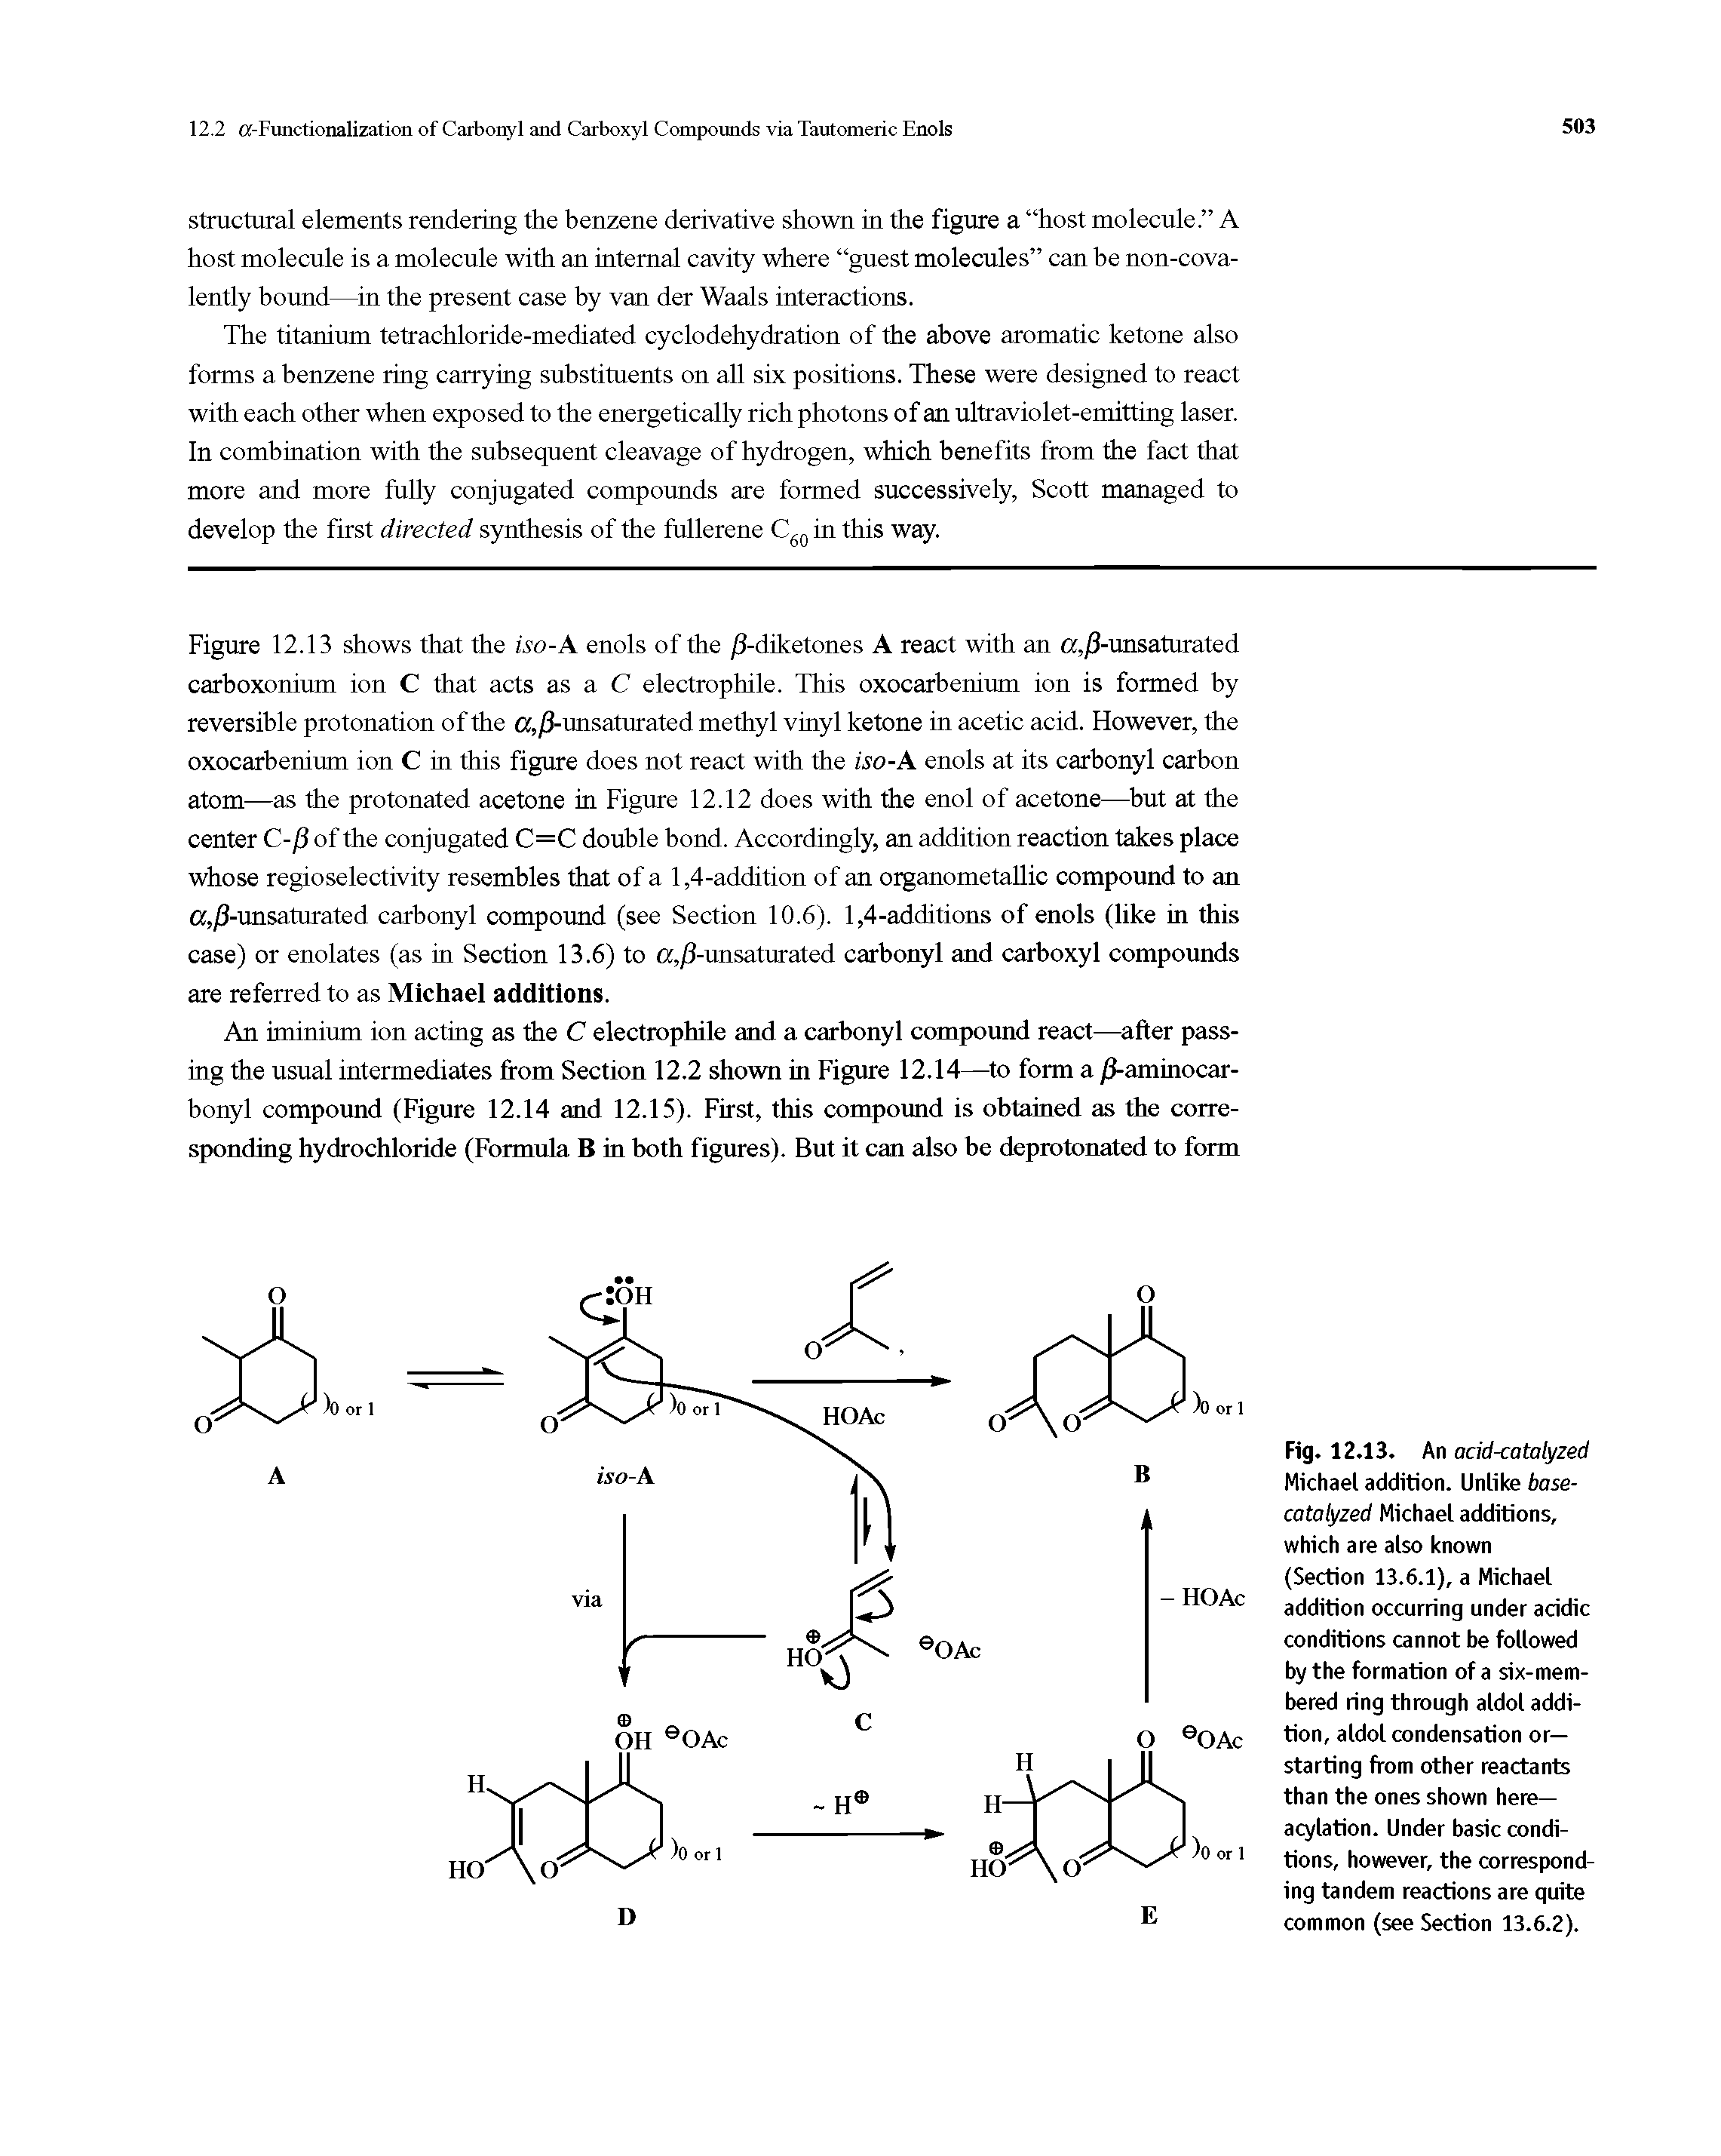 Fig. 12.13. An acid-catalyzed Michael addition. Unlike base-catalyzed Michael additions, which are also known (Section 13.6.1), a Michael addition occurring under acidic conditions cannot be followed by the formation of a six-mem-bered ring through aldol addition, aldol condensation or— starting from other reactants than the ones shown here— acylation. Under basic conditions, however, the corresponding tandem reactions are quite common (see Section 13.6.2).